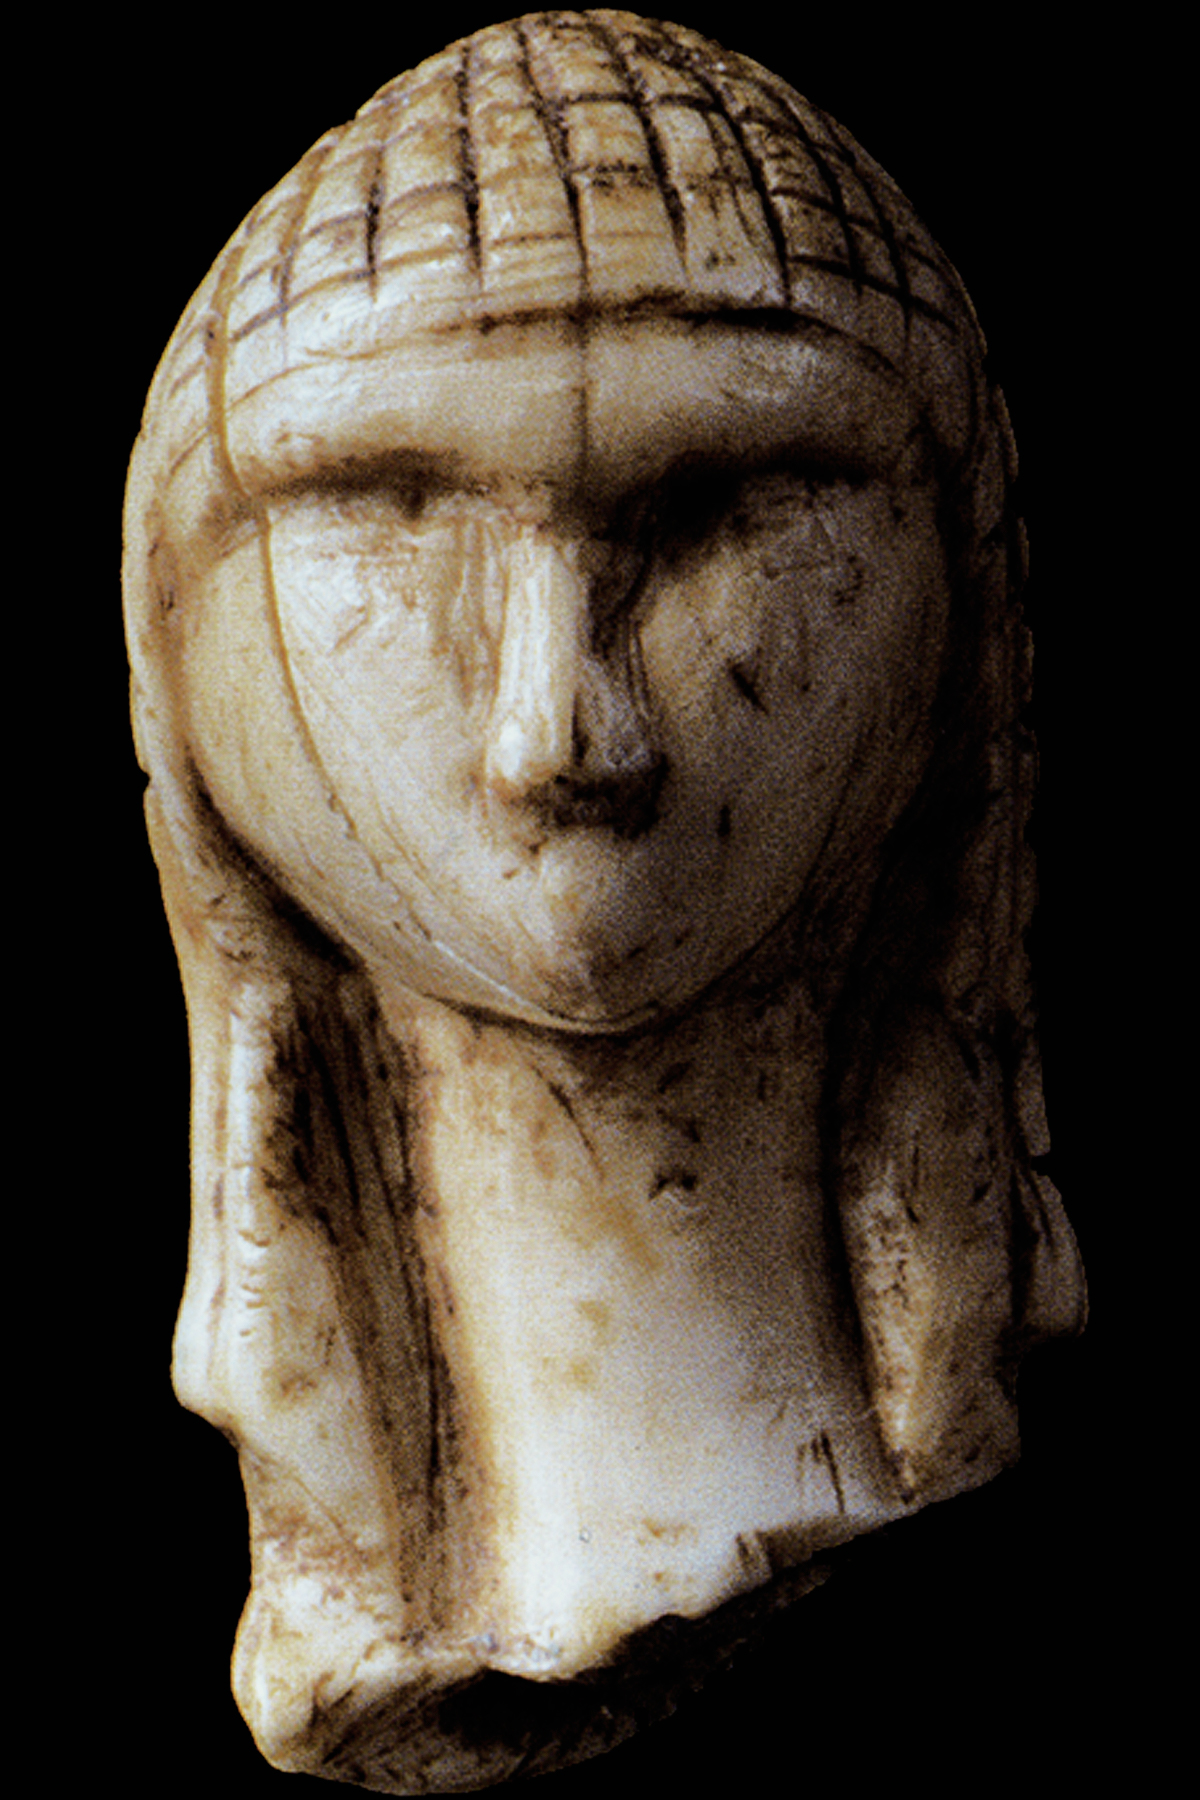 Brassempouy Portrait Head Sculptures of the Ice Age